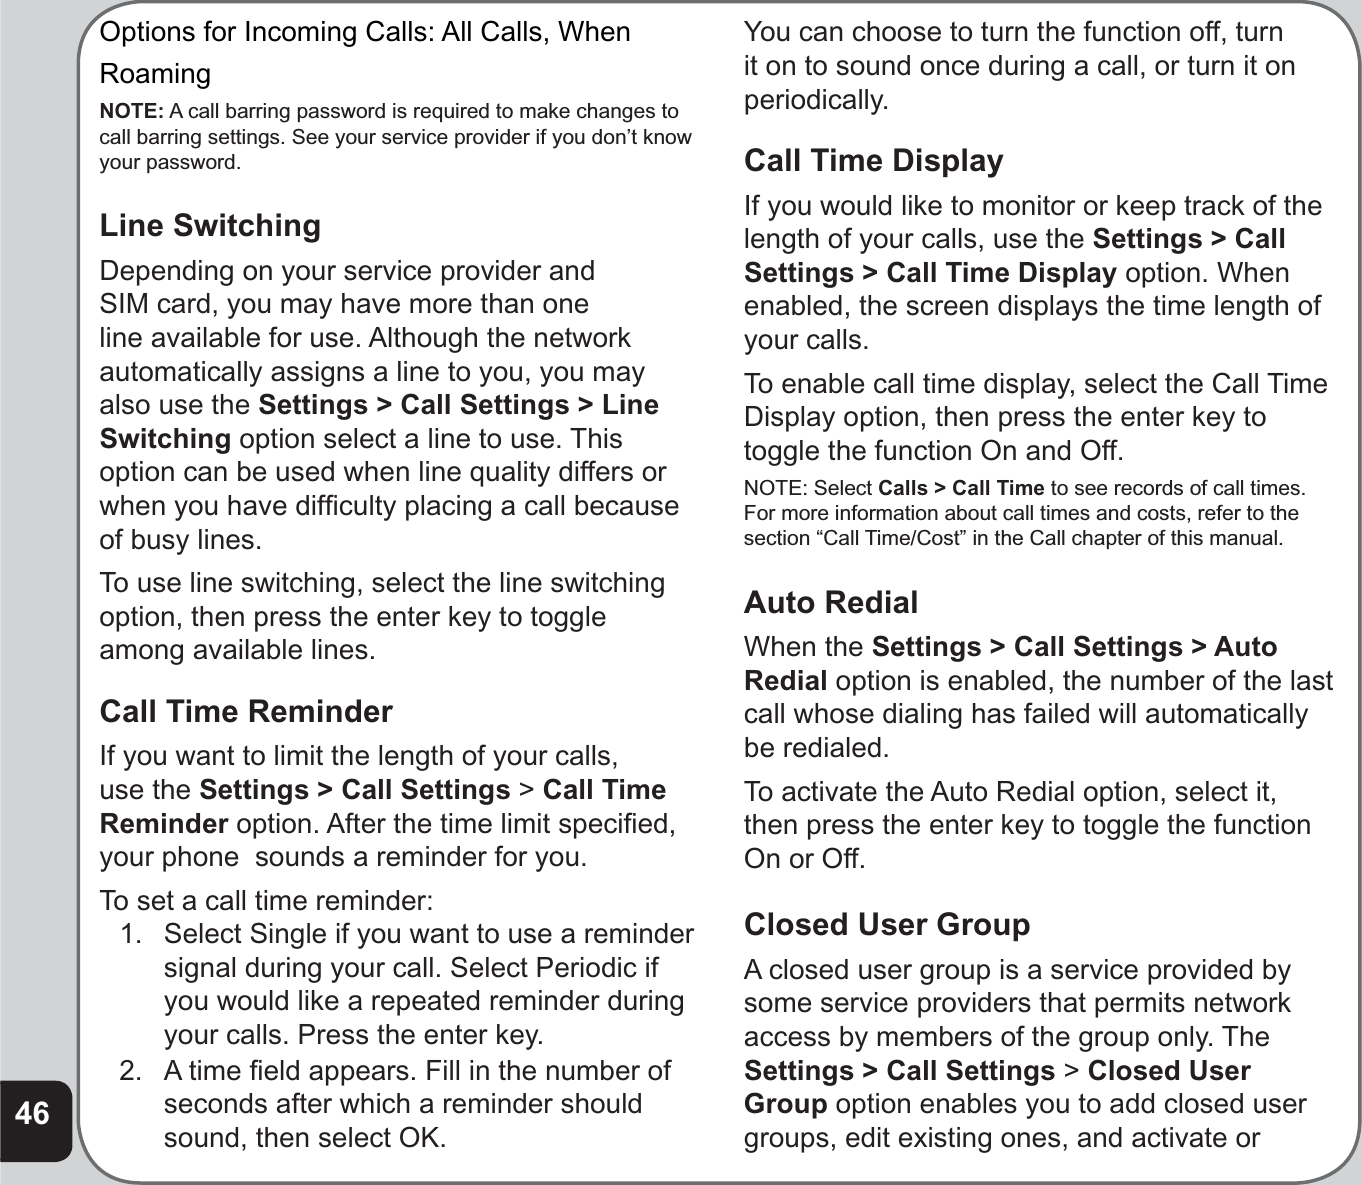 46Options for Incoming Calls: All Calls, WhenRoamingNOTE: A call barring password is required to make changes to call barring settings. See your service provider if you don’t know your password.Line SwitchingDepending on your service provider and SIM card, you may have more than one line available for use. Although the network automatically assigns a line to you, you may also use the Settings &gt; Call Settings &gt; Line Switching option select a line to use. This option can be used when line quality differs or when you have difﬁ culty placing a call because of busy lines.To use line switching, select the line switching option, then press the enter key to toggle among available lines.Call Time ReminderIf you want to limit the length of your calls, use the Settings &gt; Call Settings &gt;Call Time Reminder option. After the time limit speciﬁ ed, your phone  sounds a reminder for you.To set a call time reminder:1.   Select Single if you want to use a reminder signal during your call. Select Periodic if you would like a repeated reminder during your calls. Press the enter key.2.  A time ﬁ eld appears. Fill in the number of seconds after which a reminder should sound, then select OK. You can choose to turn the function off, turn it on to sound once during a call, or turn it on periodically.Call Time DisplayIf you would like to monitor or keep track of the length of your calls, use the Settings &gt; Call Settings &gt; Call Time Display option. When enabled, the screen displays the time length of your calls.To enable call time display, select the Call Time Display option, then press the enter key to toggle the function On and Off. NOTE: Select Calls &gt; Call Time to see records of call times.For more information about call times and costs, refer to the section “Call Time/Cost” in the Call chapter of this manual.Auto RedialWhen the Settings &gt; Call Settings &gt; Auto Redial option is enabled, the number of the last call whose dialing has failed will automatically be redialed.To activate the Auto Redial option, select it, then press the enter key to toggle the function On or Off.Closed User GroupA closed user group is a service provided by some service providers that permits network access by members of the group only. The Settings &gt; Call Settings &gt;Closed User Group option enables you to add closed user groups, edit existing ones, and activate or 